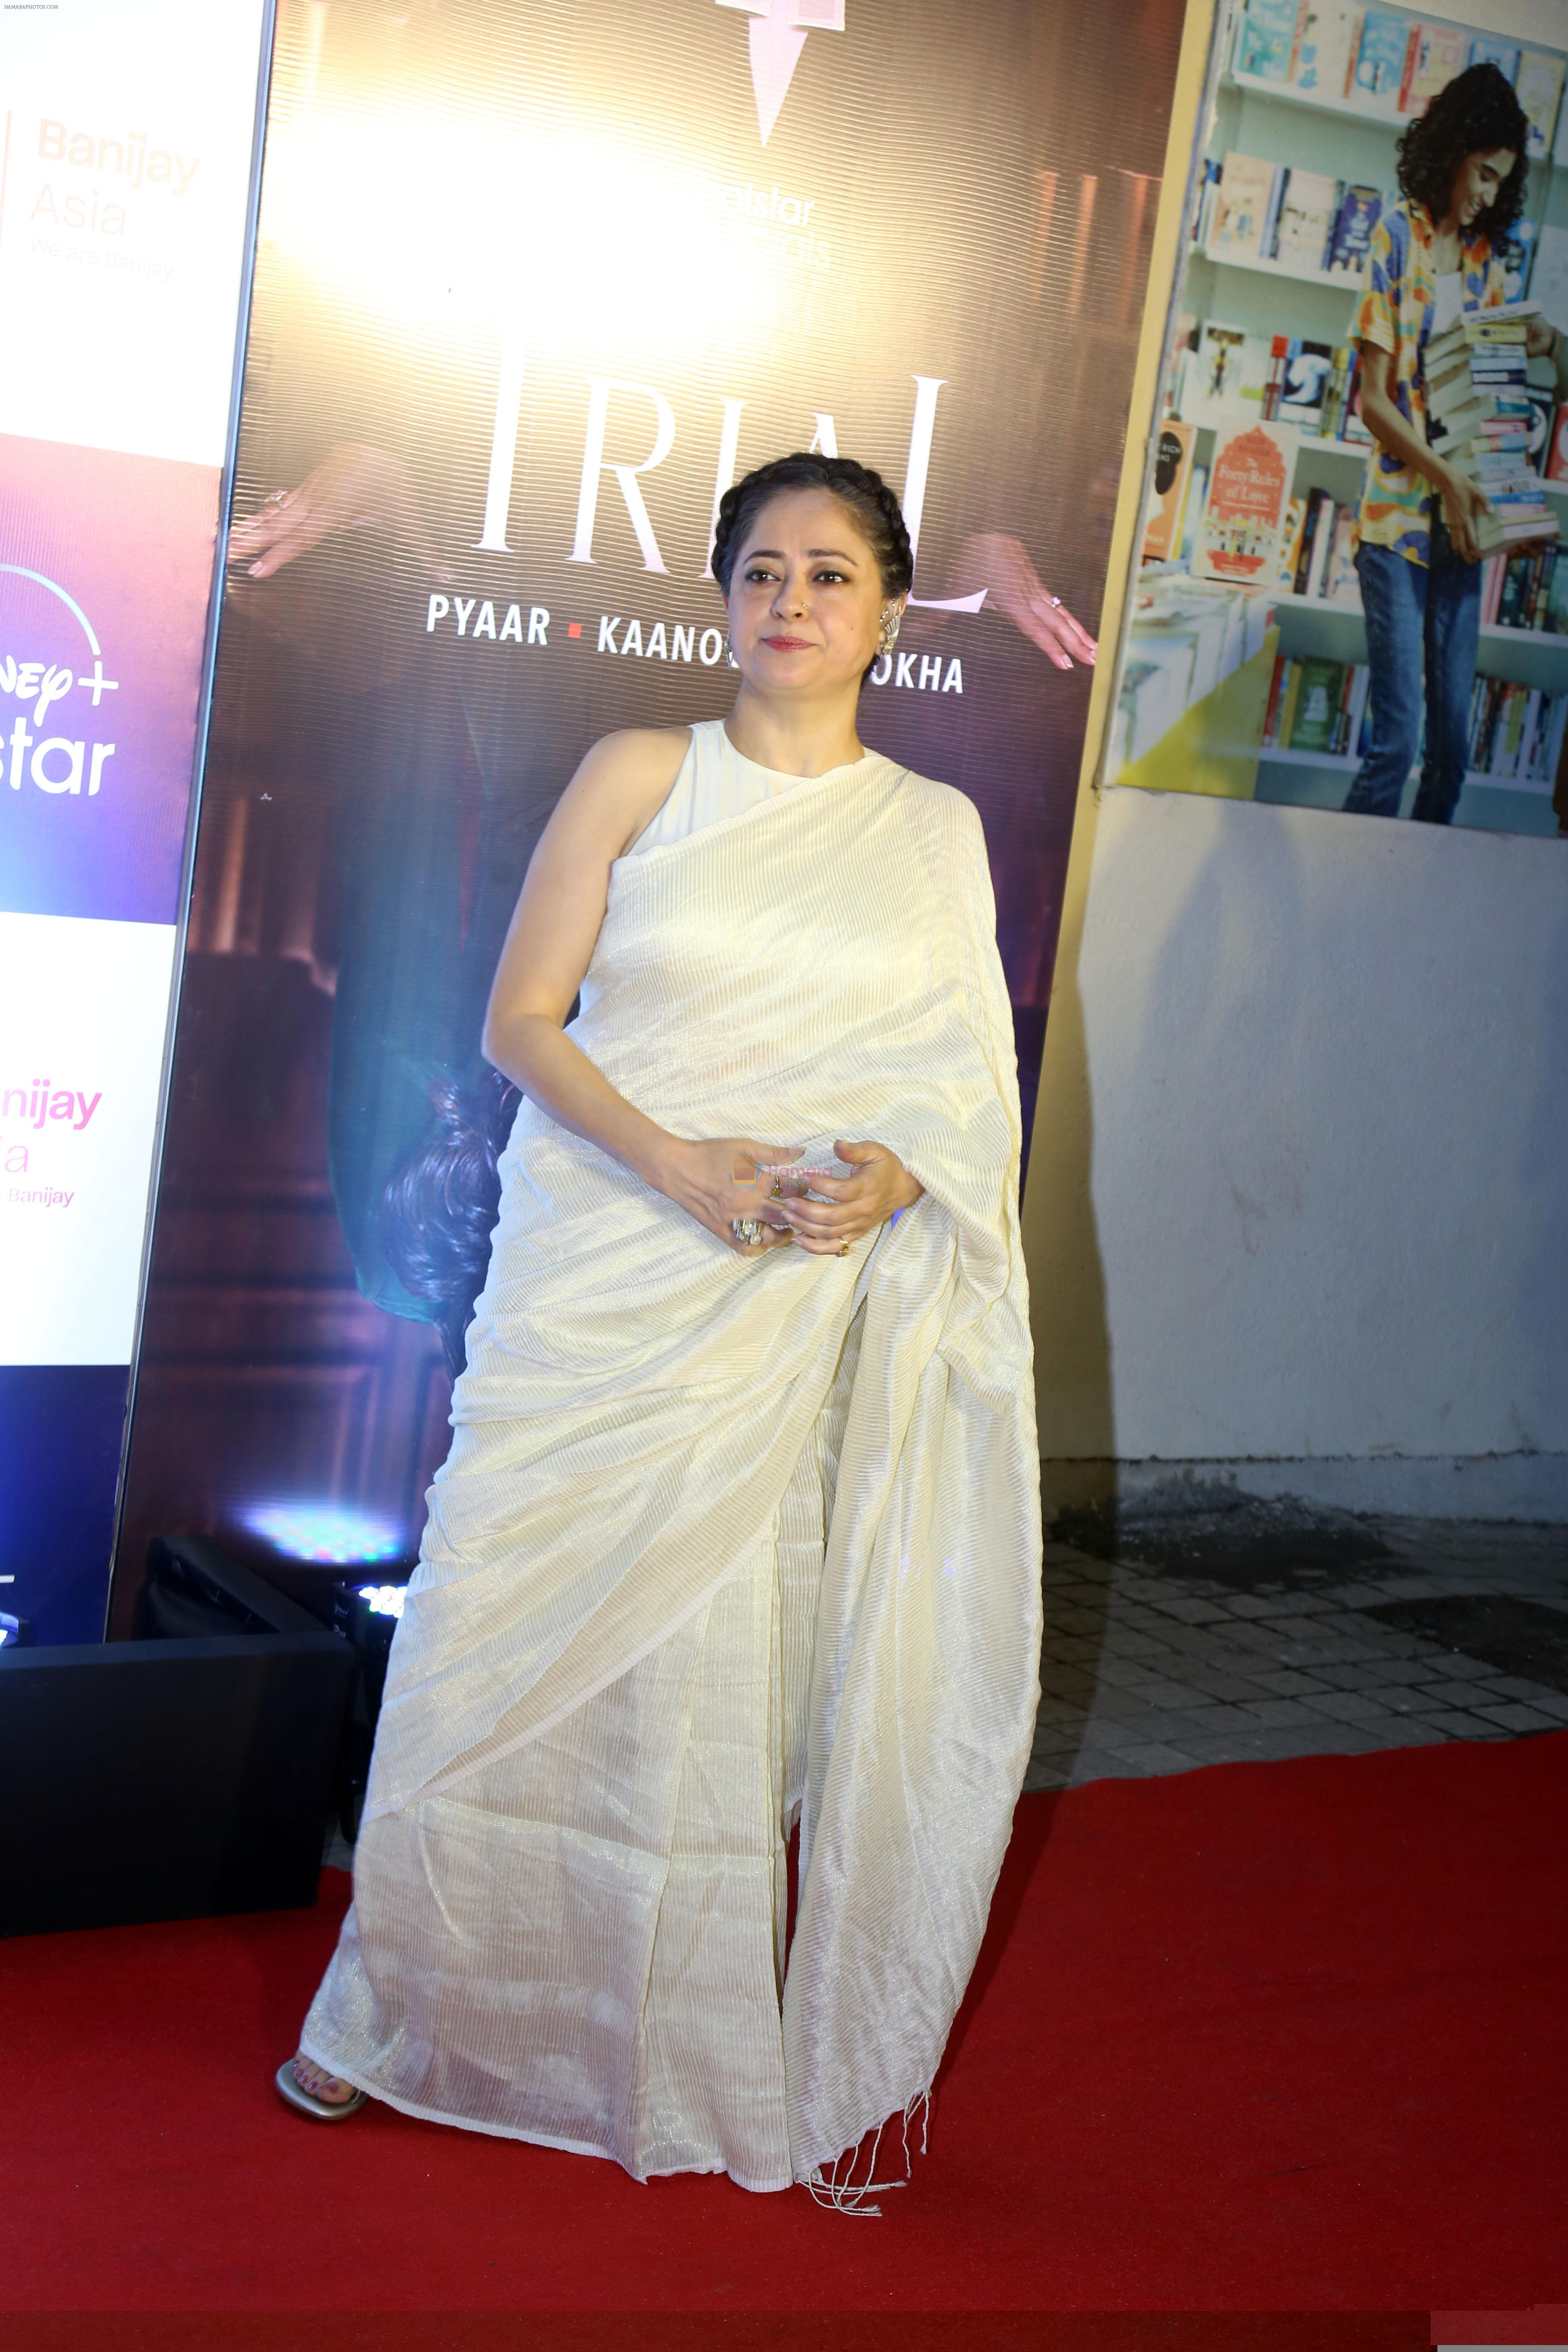 Sheeba Chaddha at the premiere of the series The Trial - Pyaar, Kaanoon, Dhokha on 13 July 2023